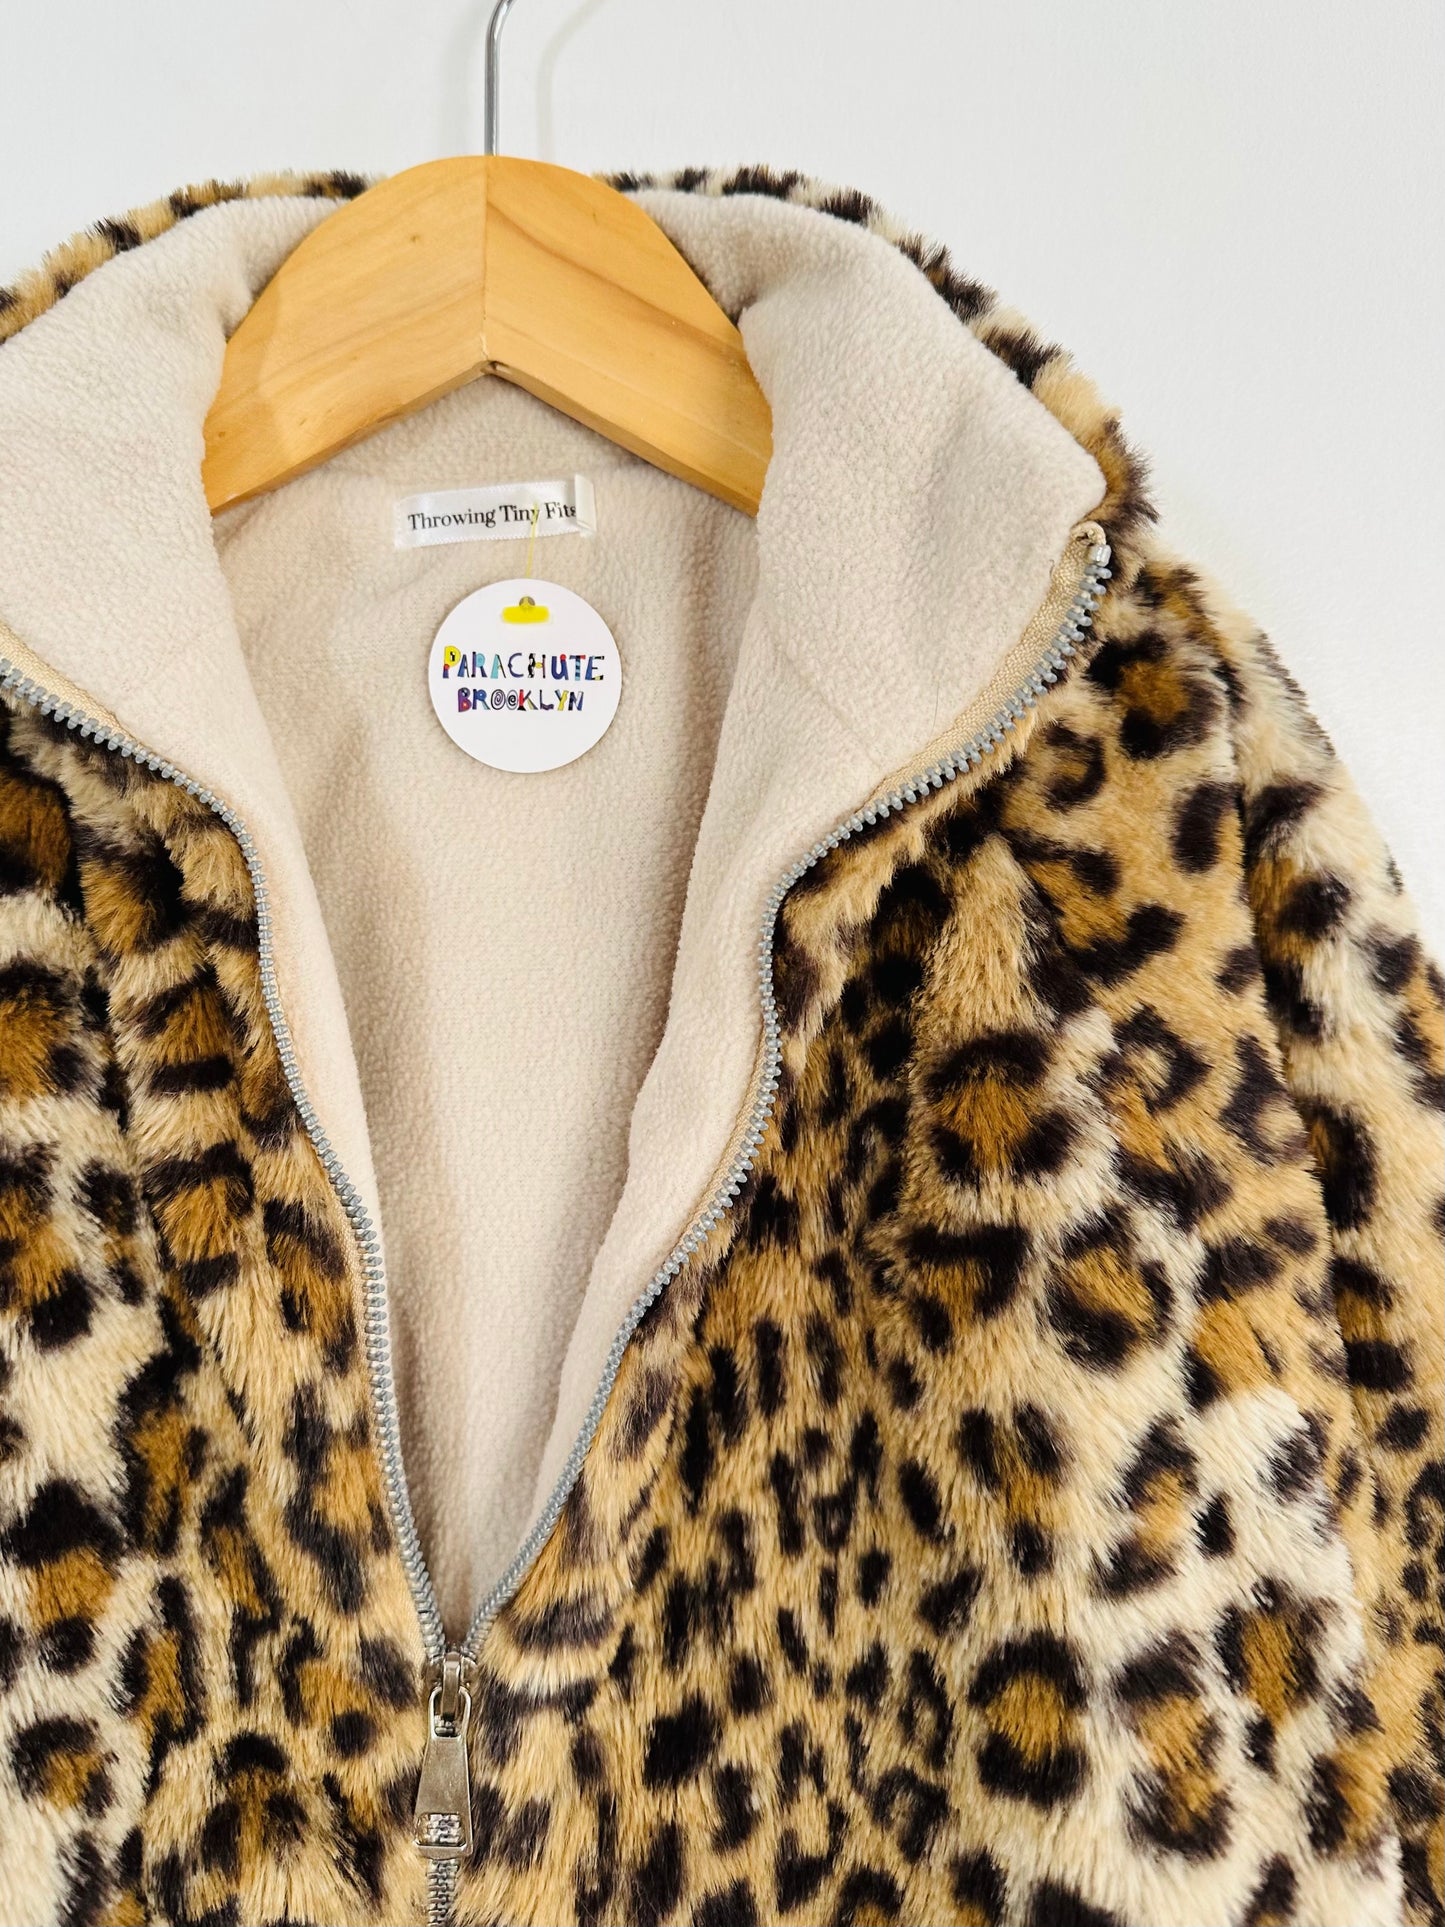 Throwing Tiny Fits Leopard Jacket / 12M